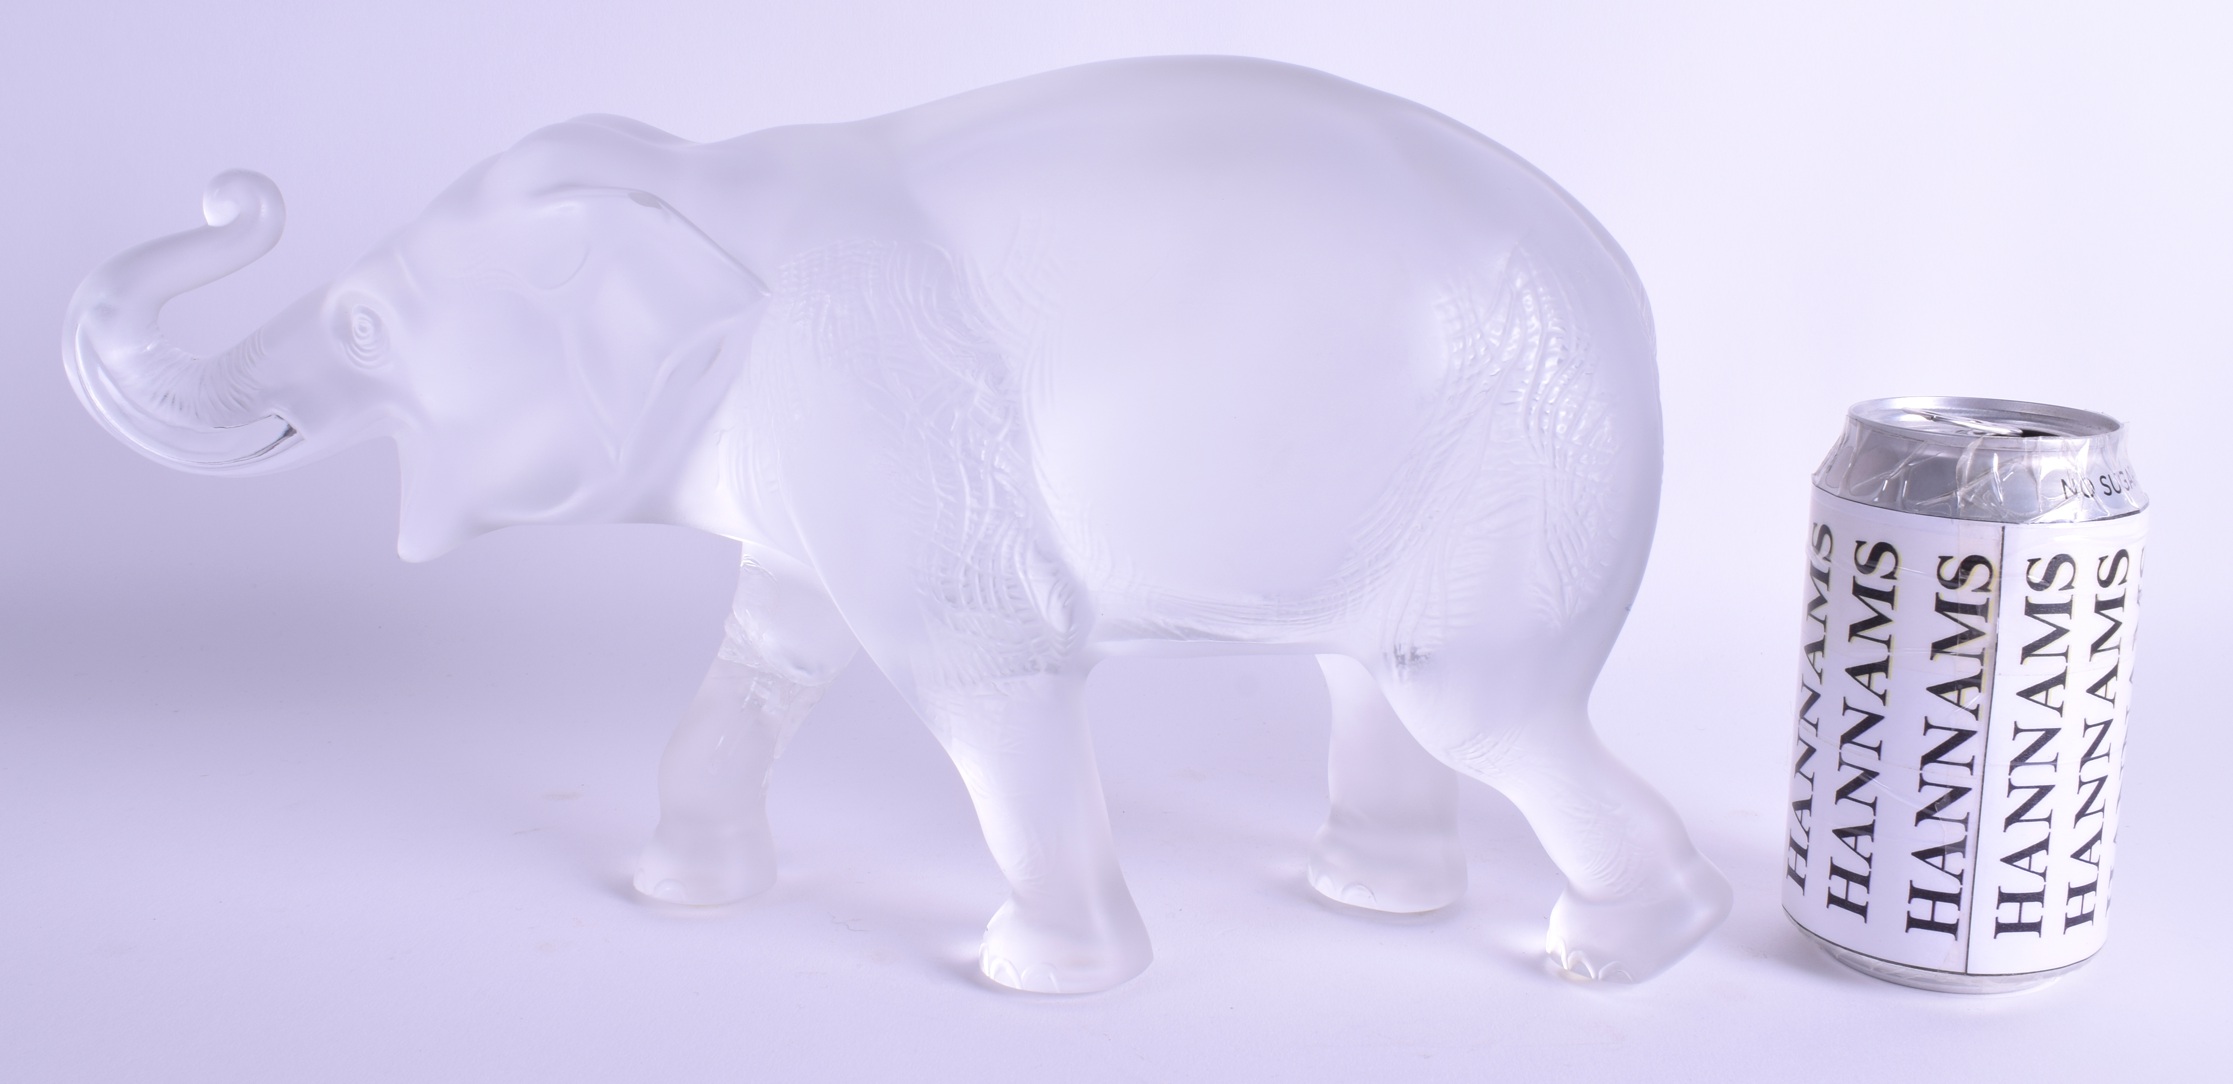 A RARE LARGE LALIQUE CRYSTAL GLASS FIGURE OF A SUMATRA ELEPHANT modelled in a roaming stance. 35 cm